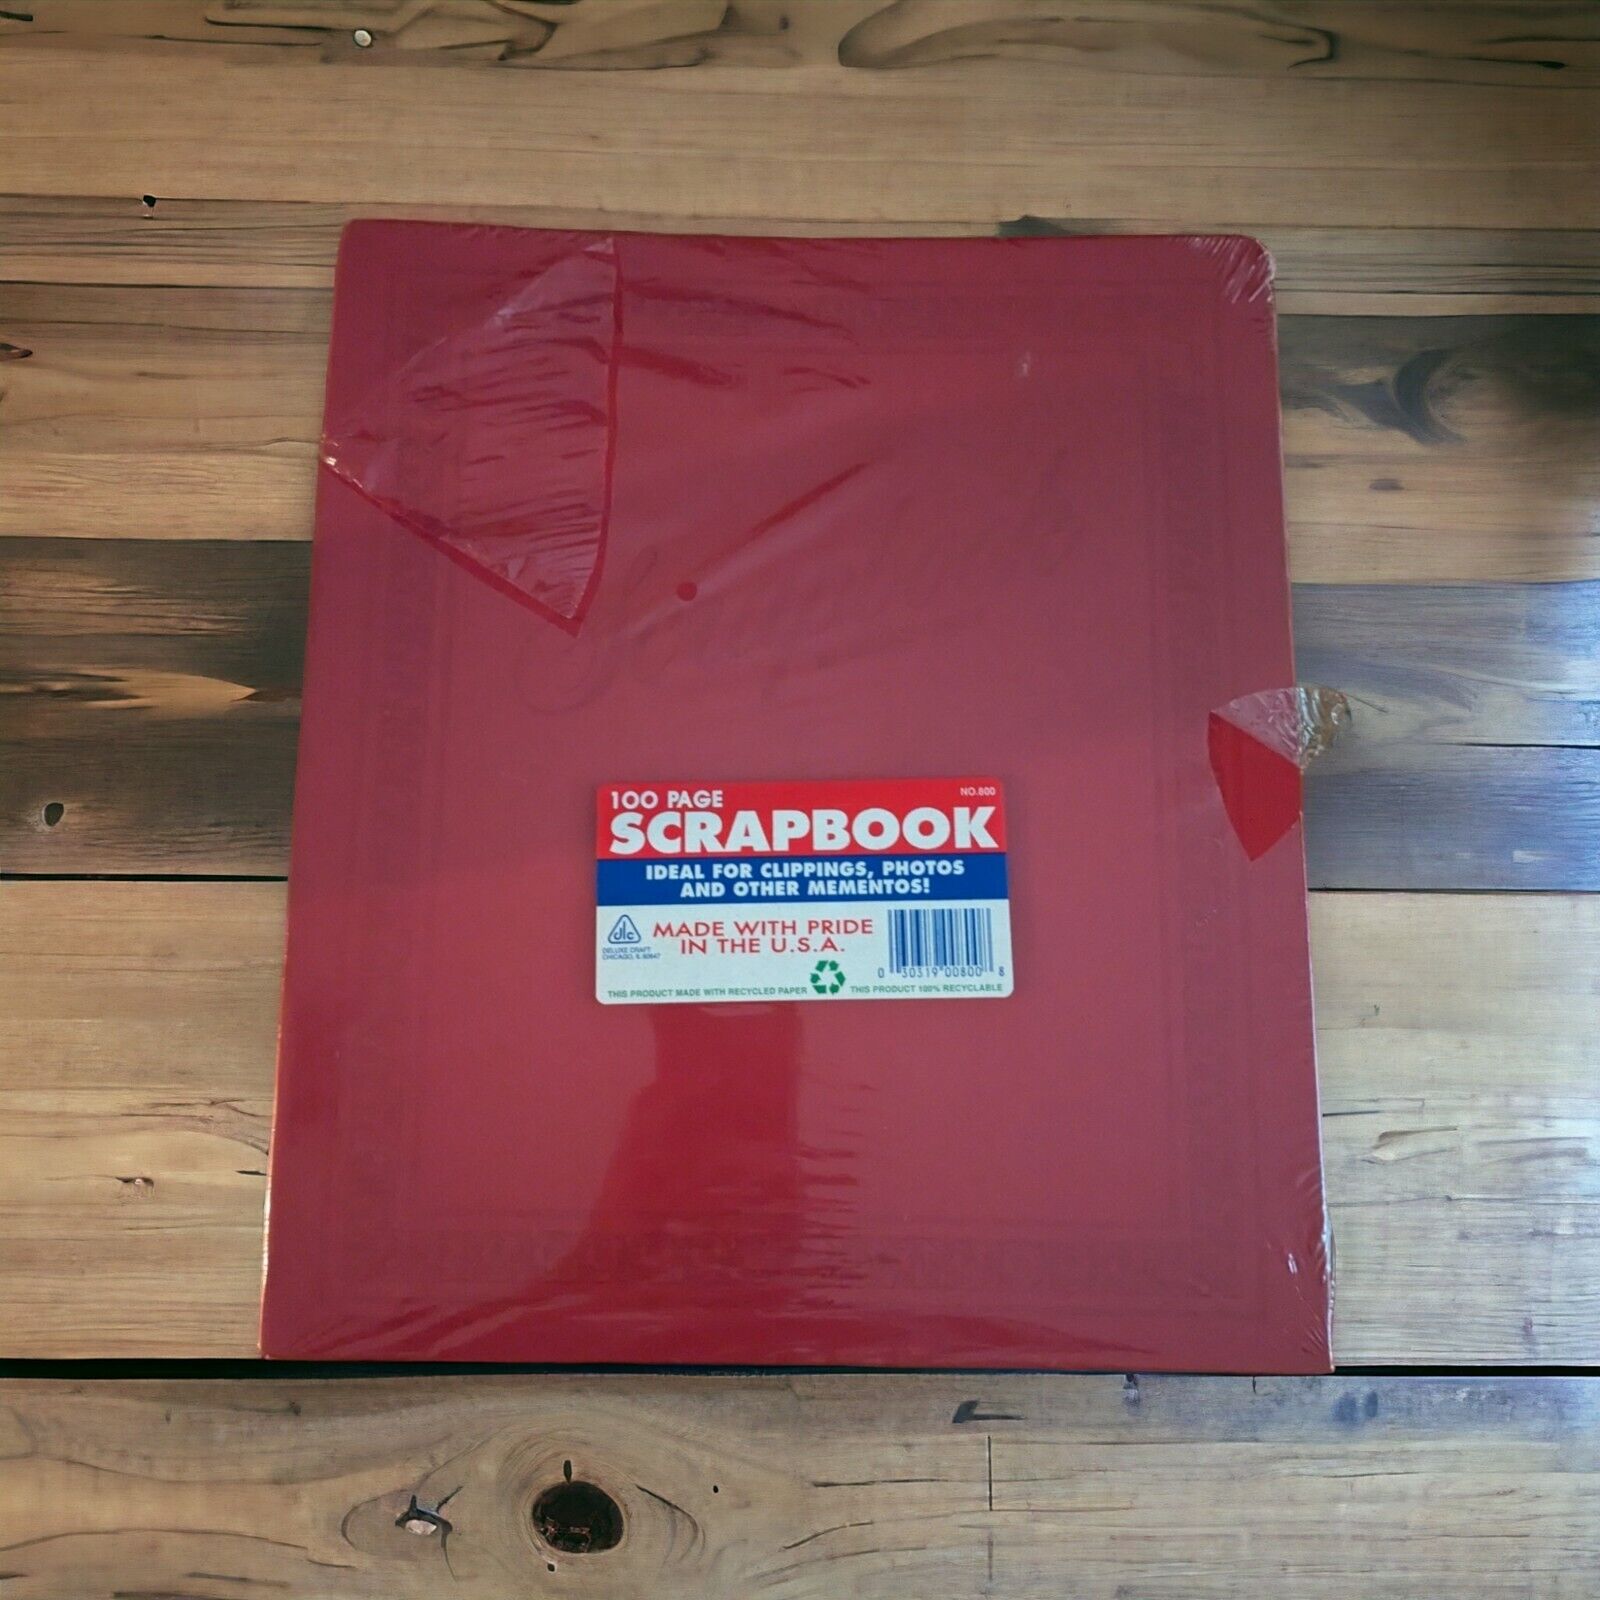 Vintage NEW SEALED deluxe Craft No. 800 Red 12 x14”Scrapbook 100 page Album. USA